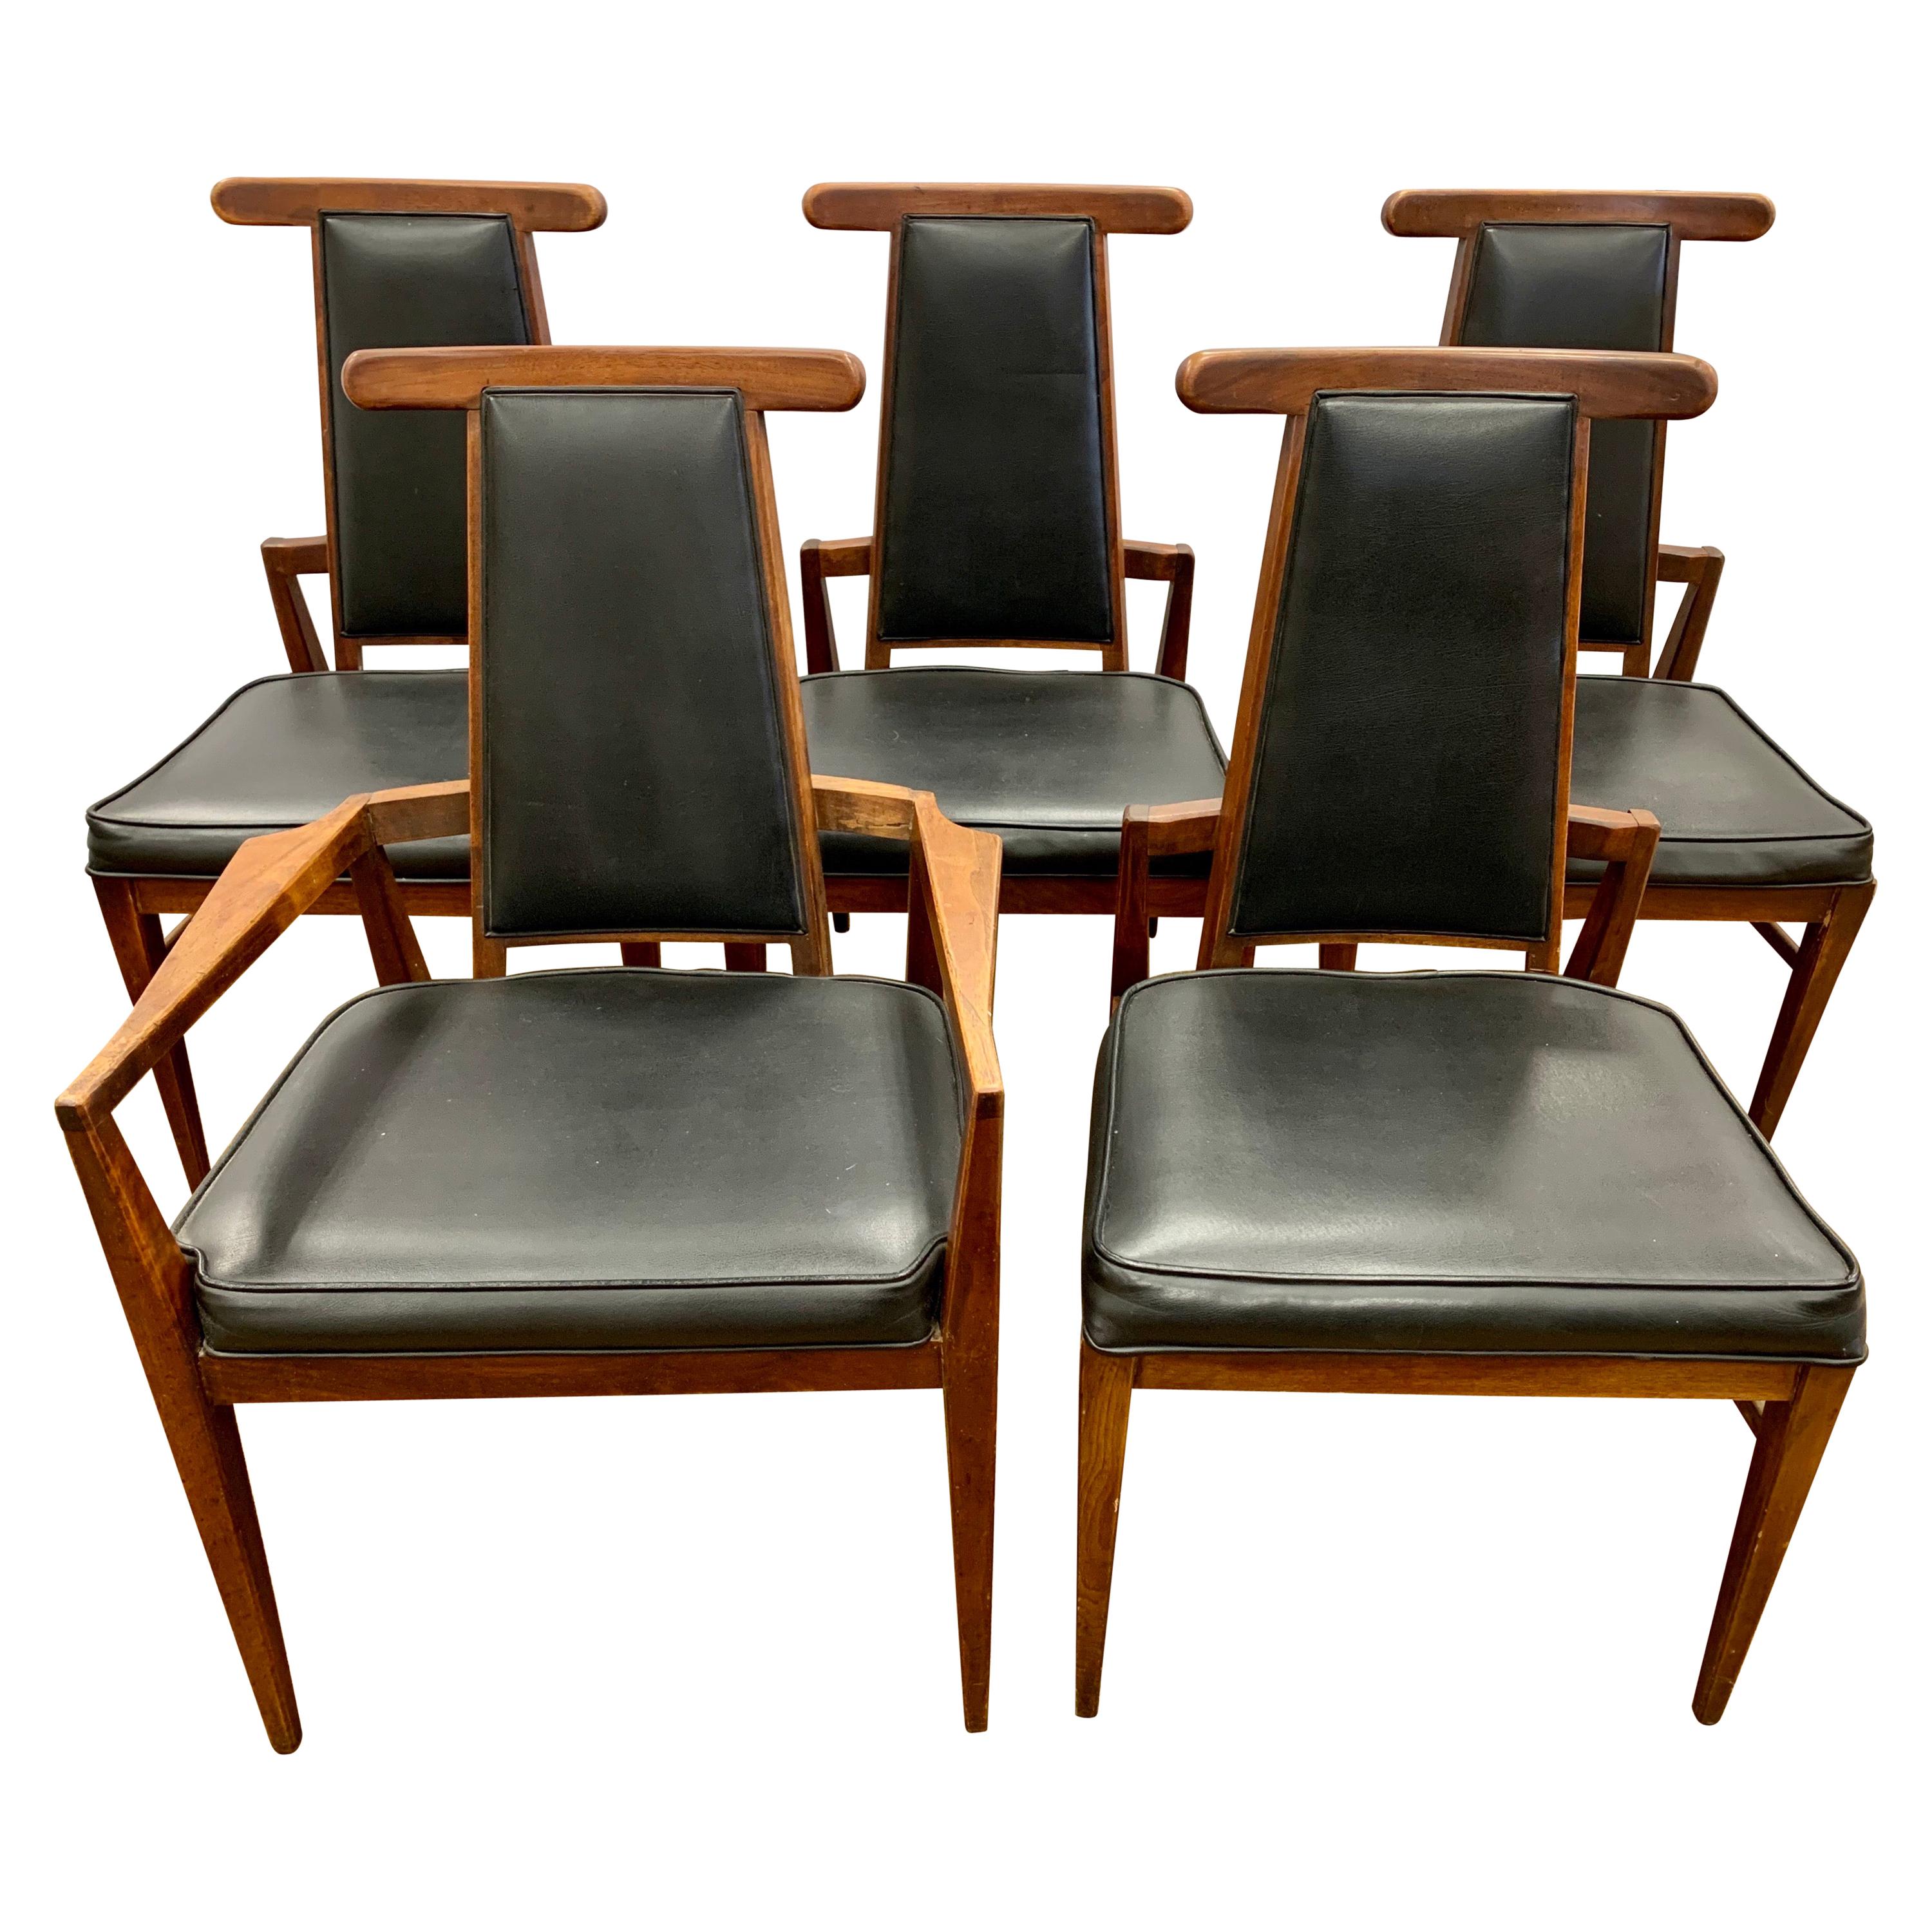 Set of Five Mid-Century Modern Signed Foster-McDavid Ox Sculptural Dining Chairs